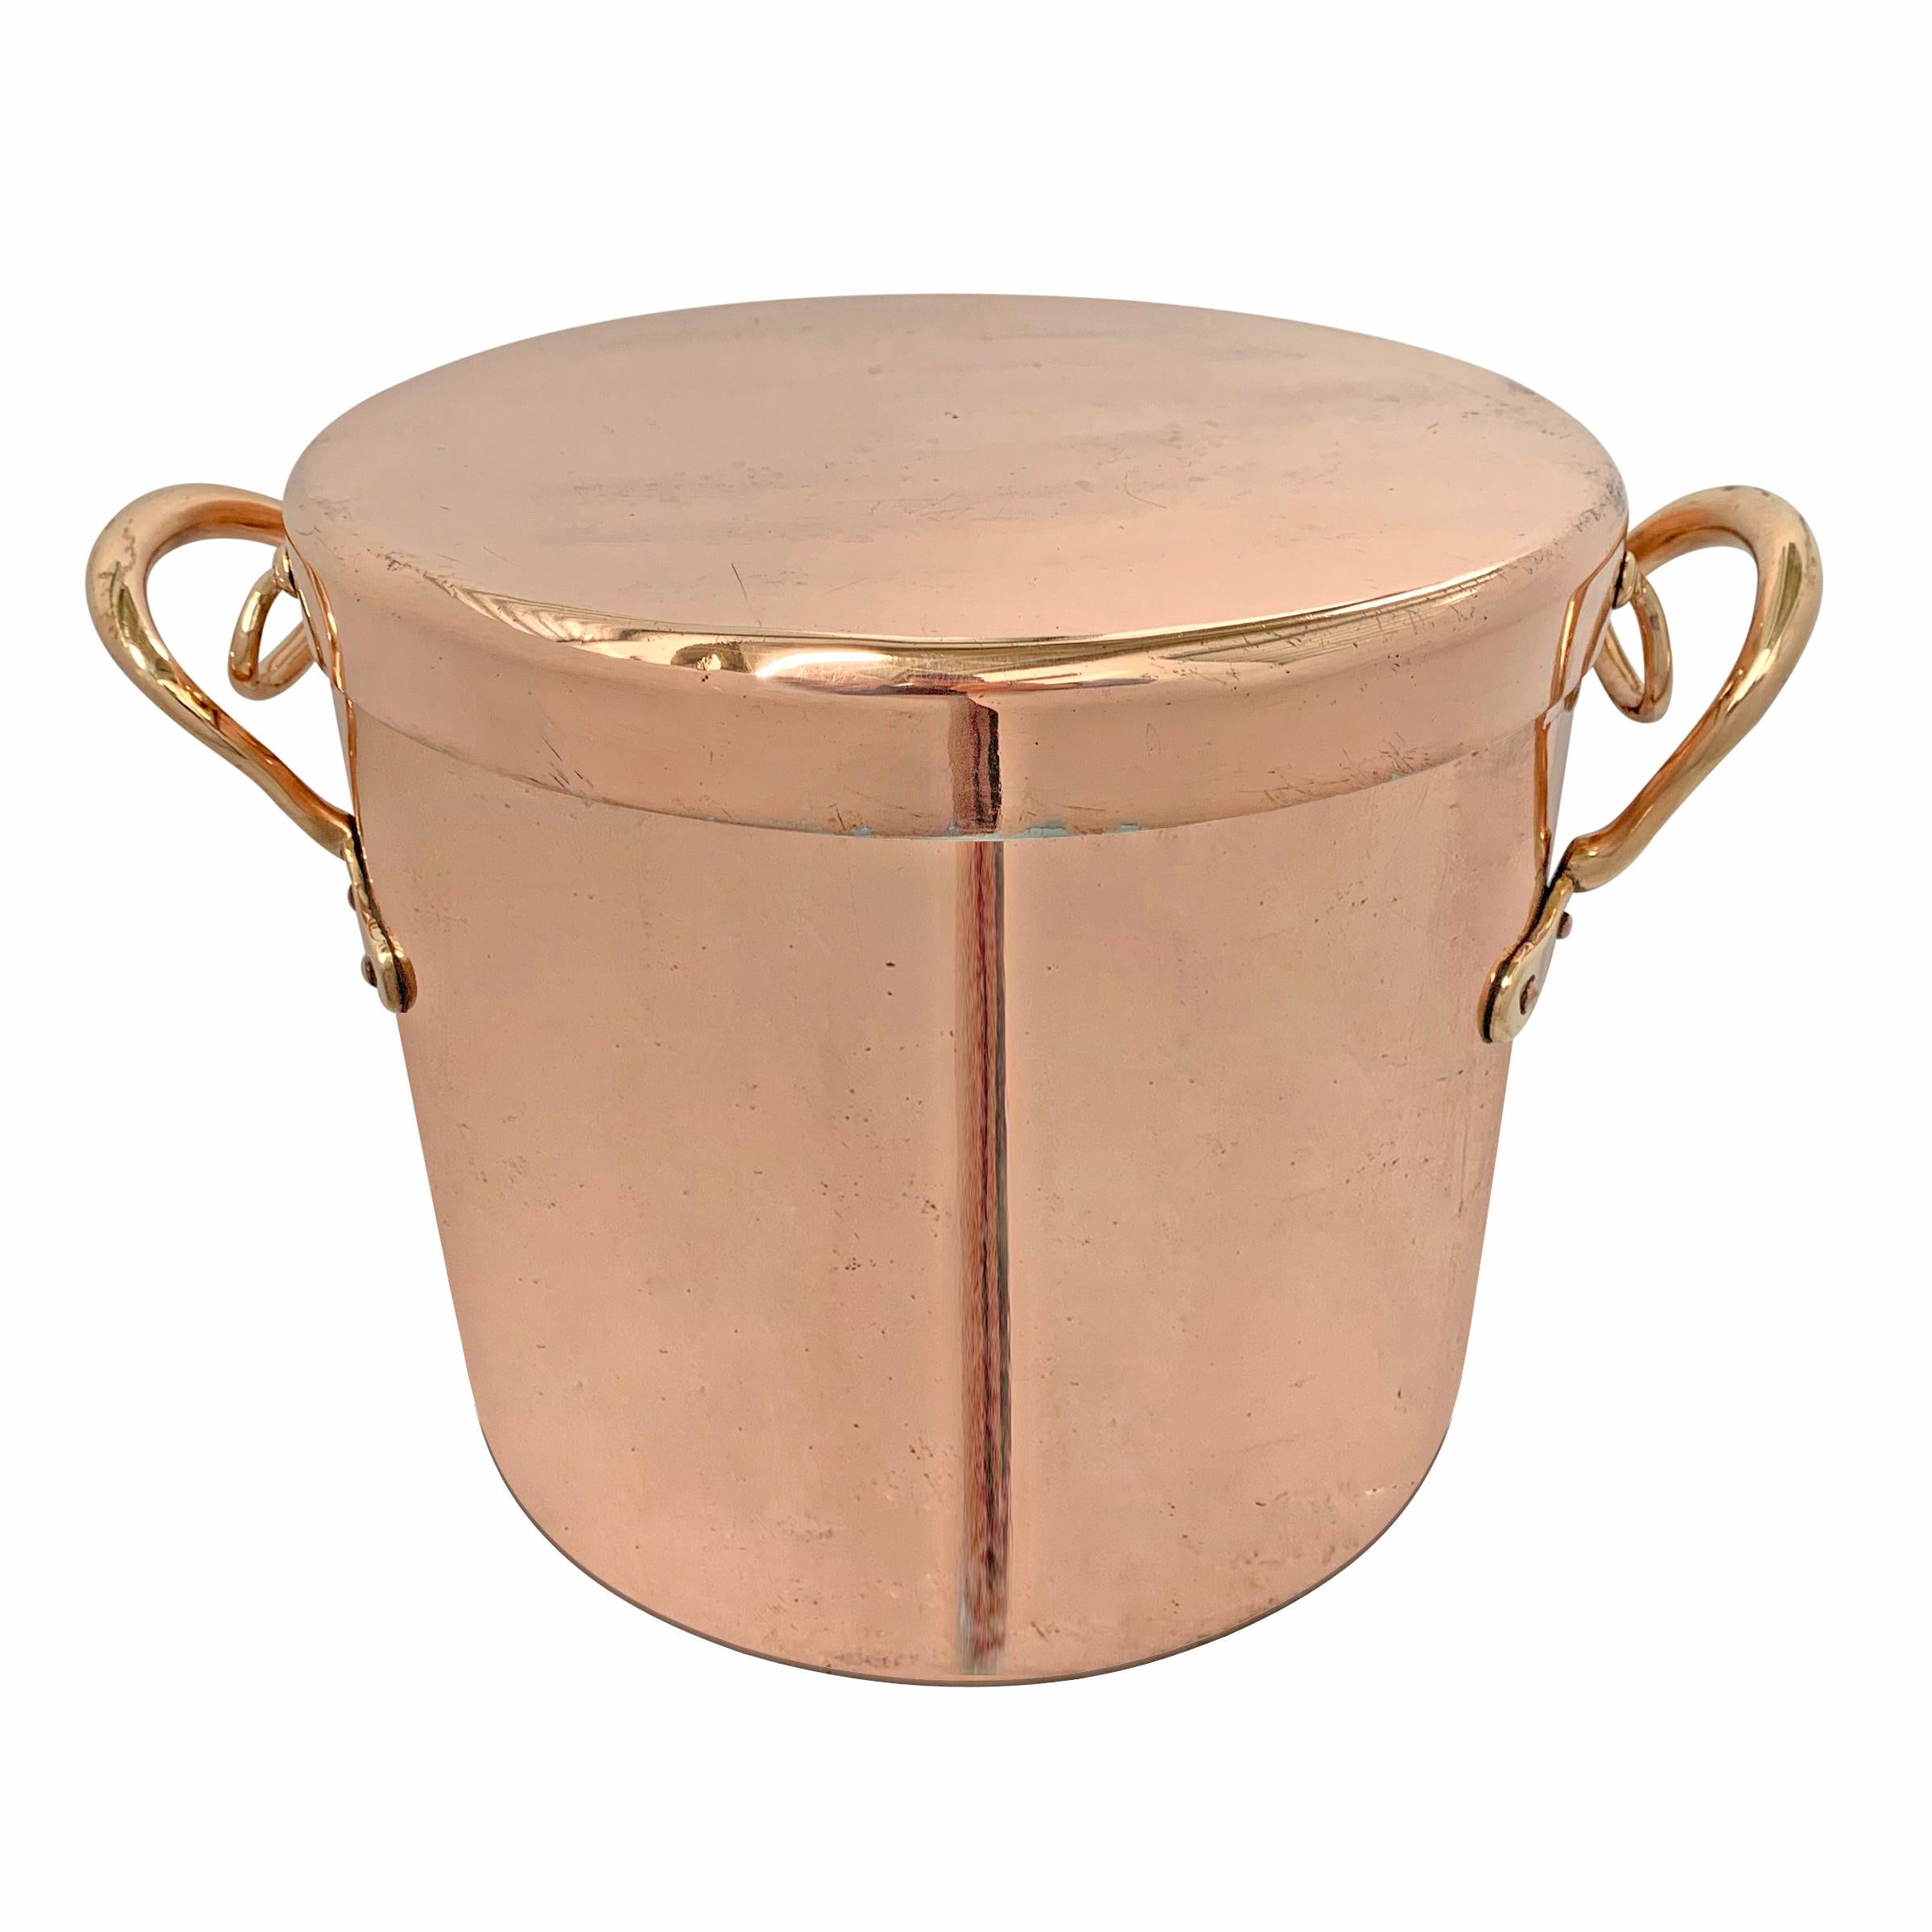 A fantastic 19th century English 1.5 mm thick copper daubière (roasting pot), with a tightly fitted lid, with both lid and pot having bronze handles. The lid doubles as a shallow sauté pan. One handle on the pot is marked with an 